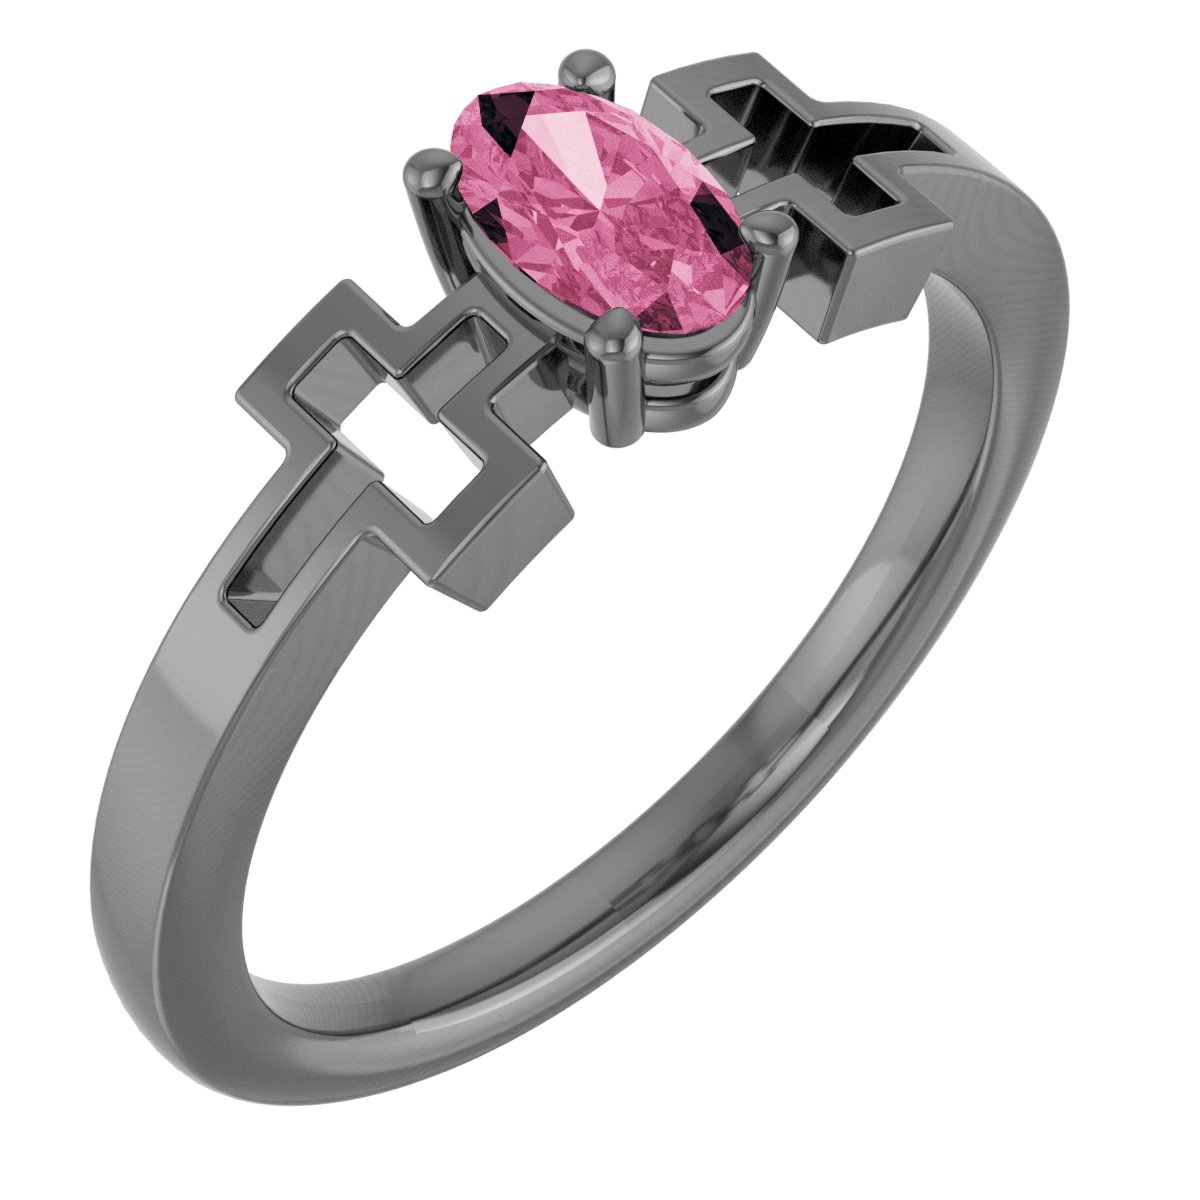 Sterling Silver Pink Tourmaline Solitaire Cross Youth Ring